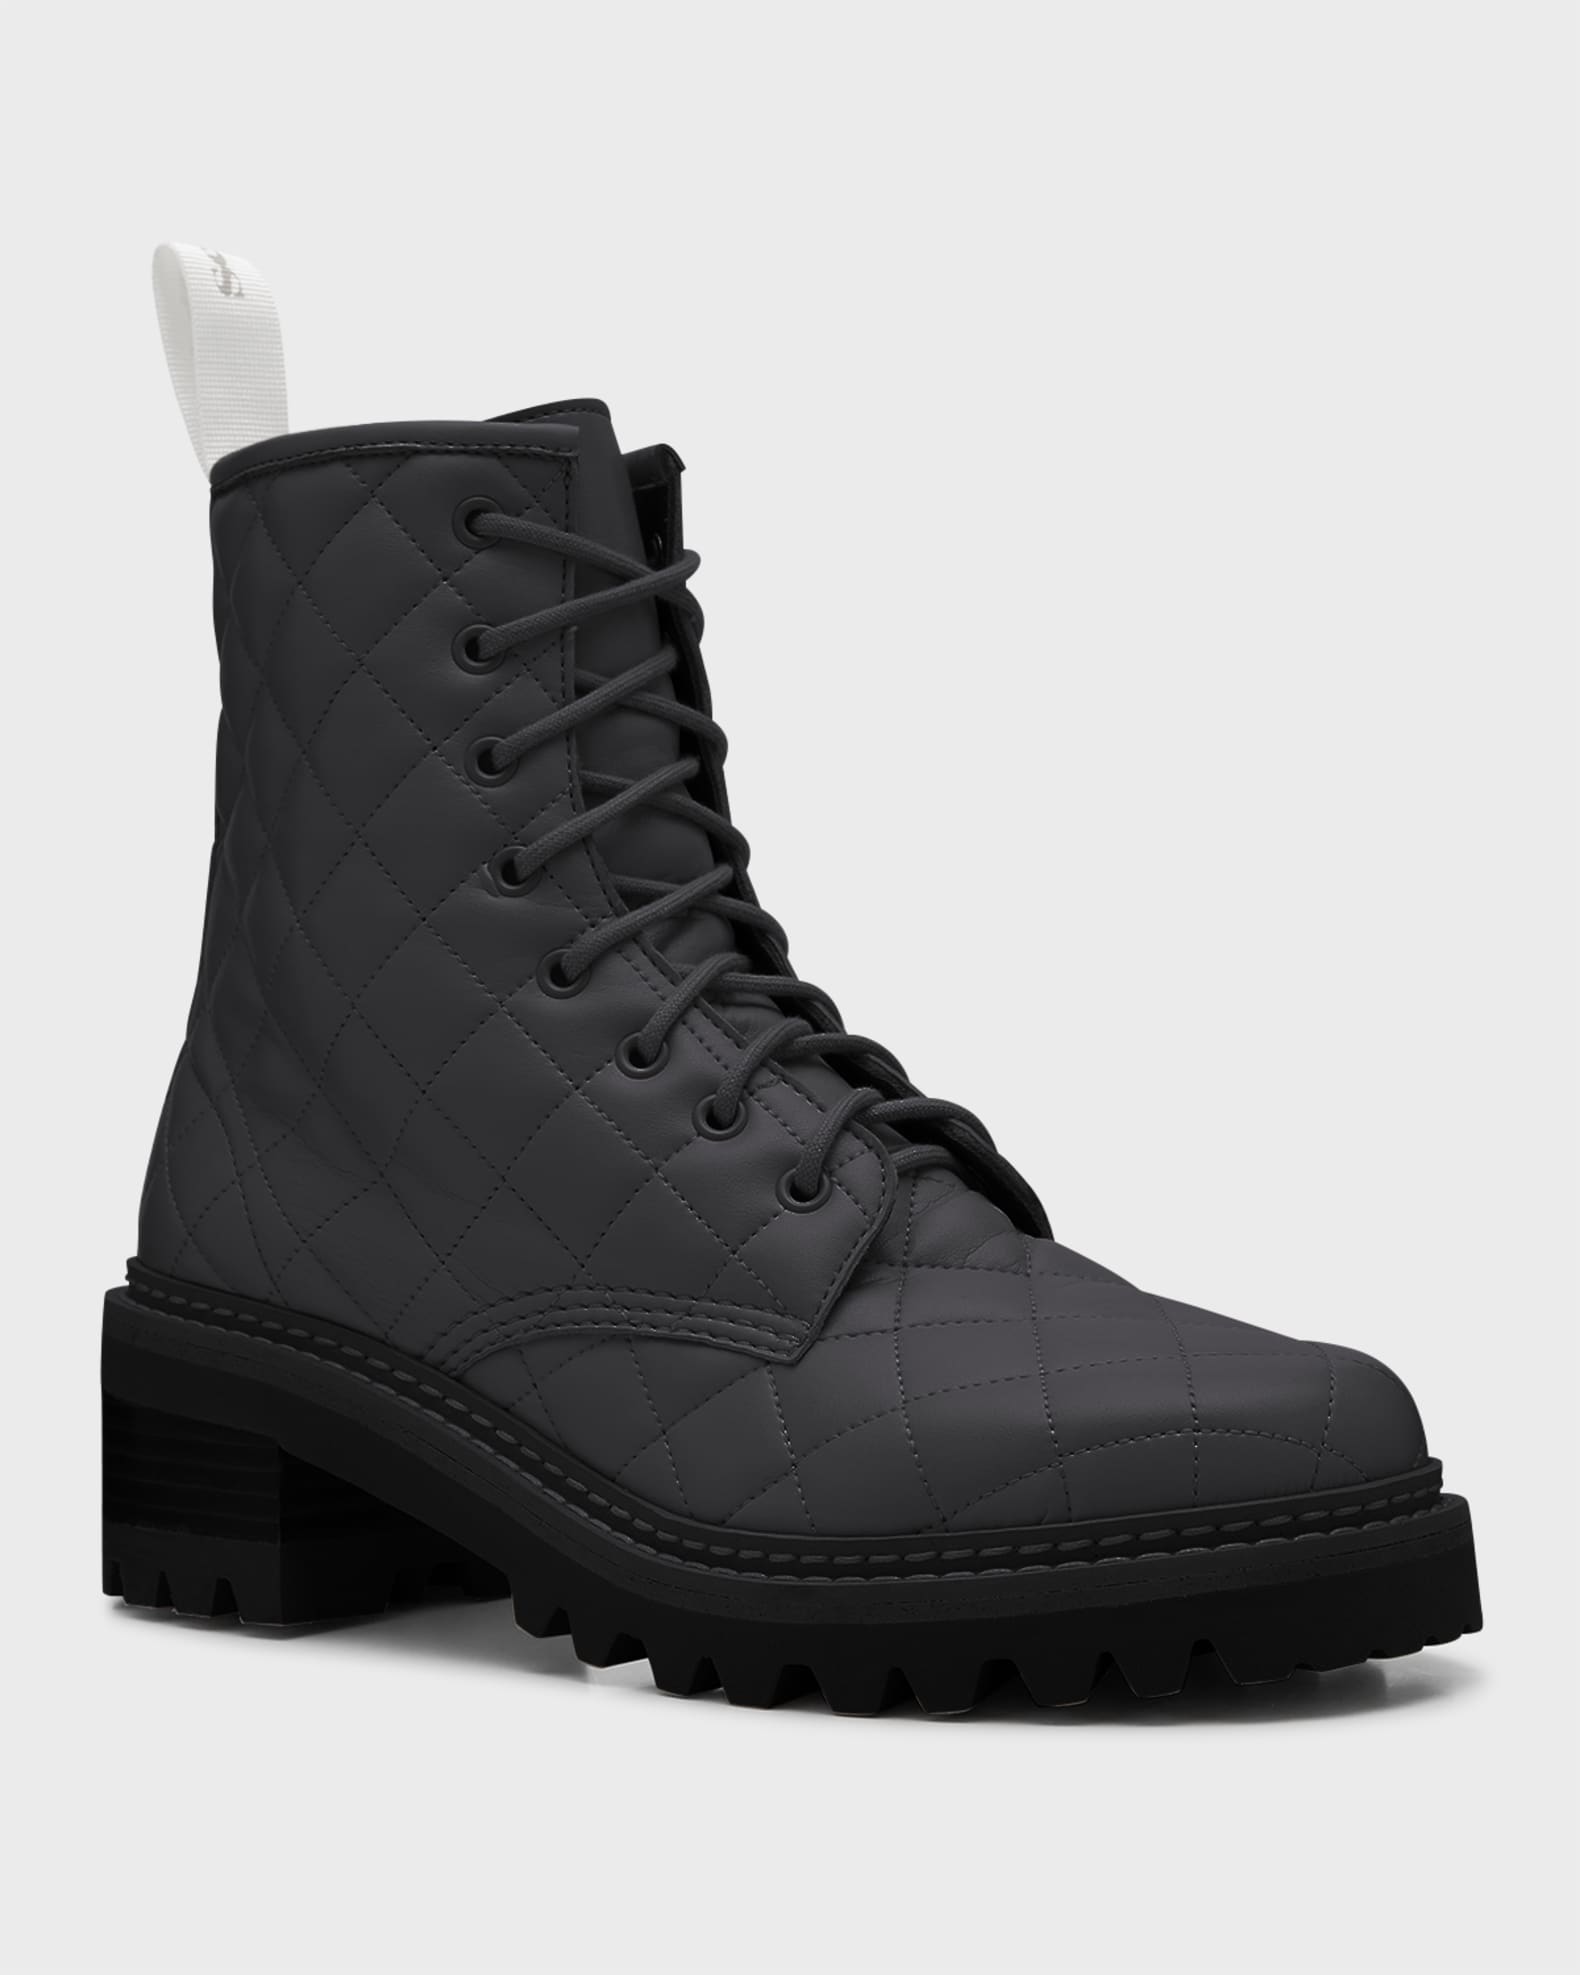 CHANEL Shiny Calfskin Patent Quilted Chain Lace Up Combat Boots